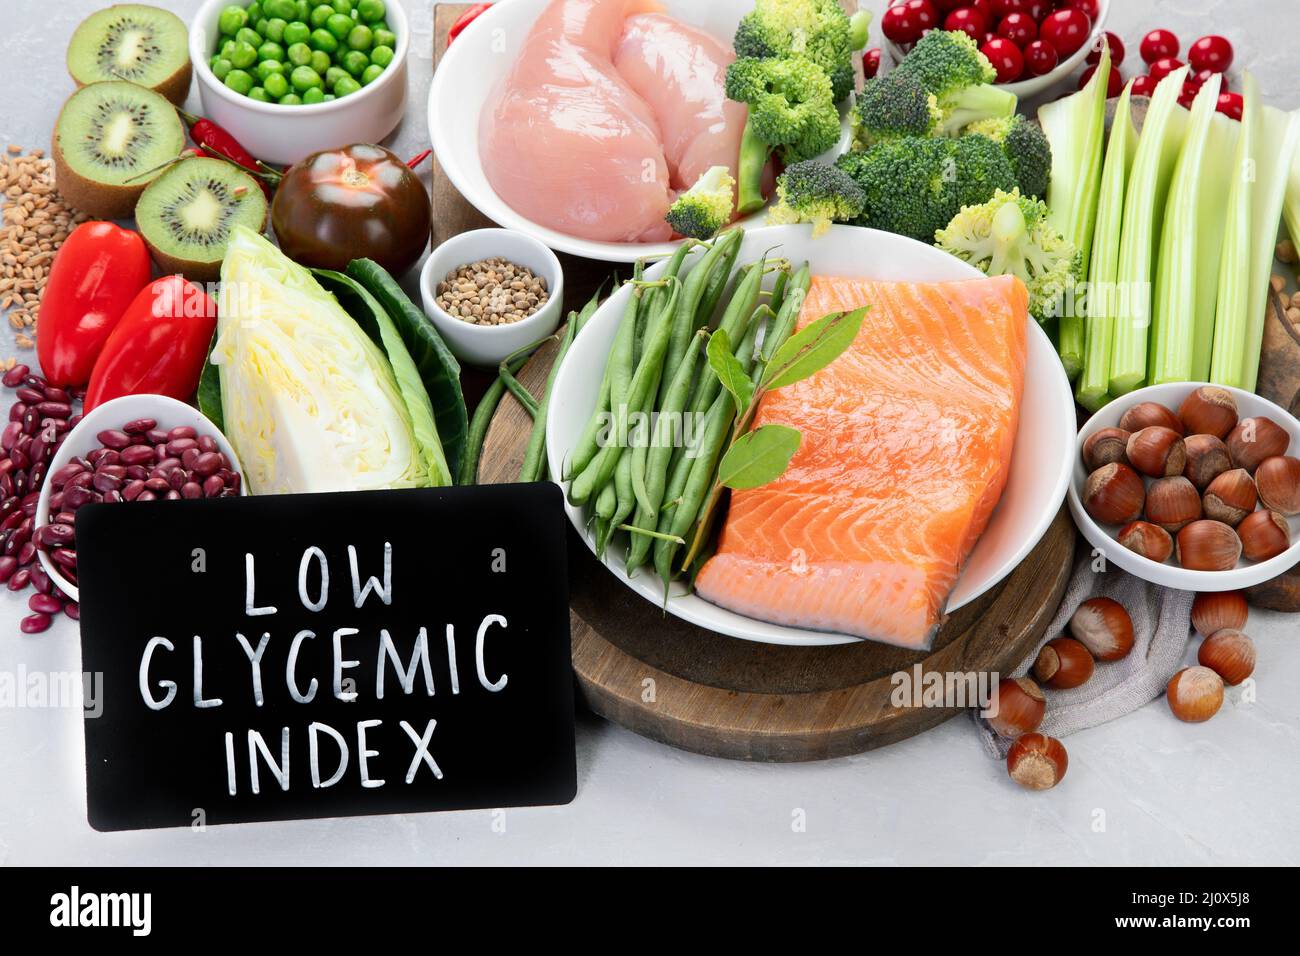 Foods with low glycemic index on gray background. Healthy food concept. Stock Photo